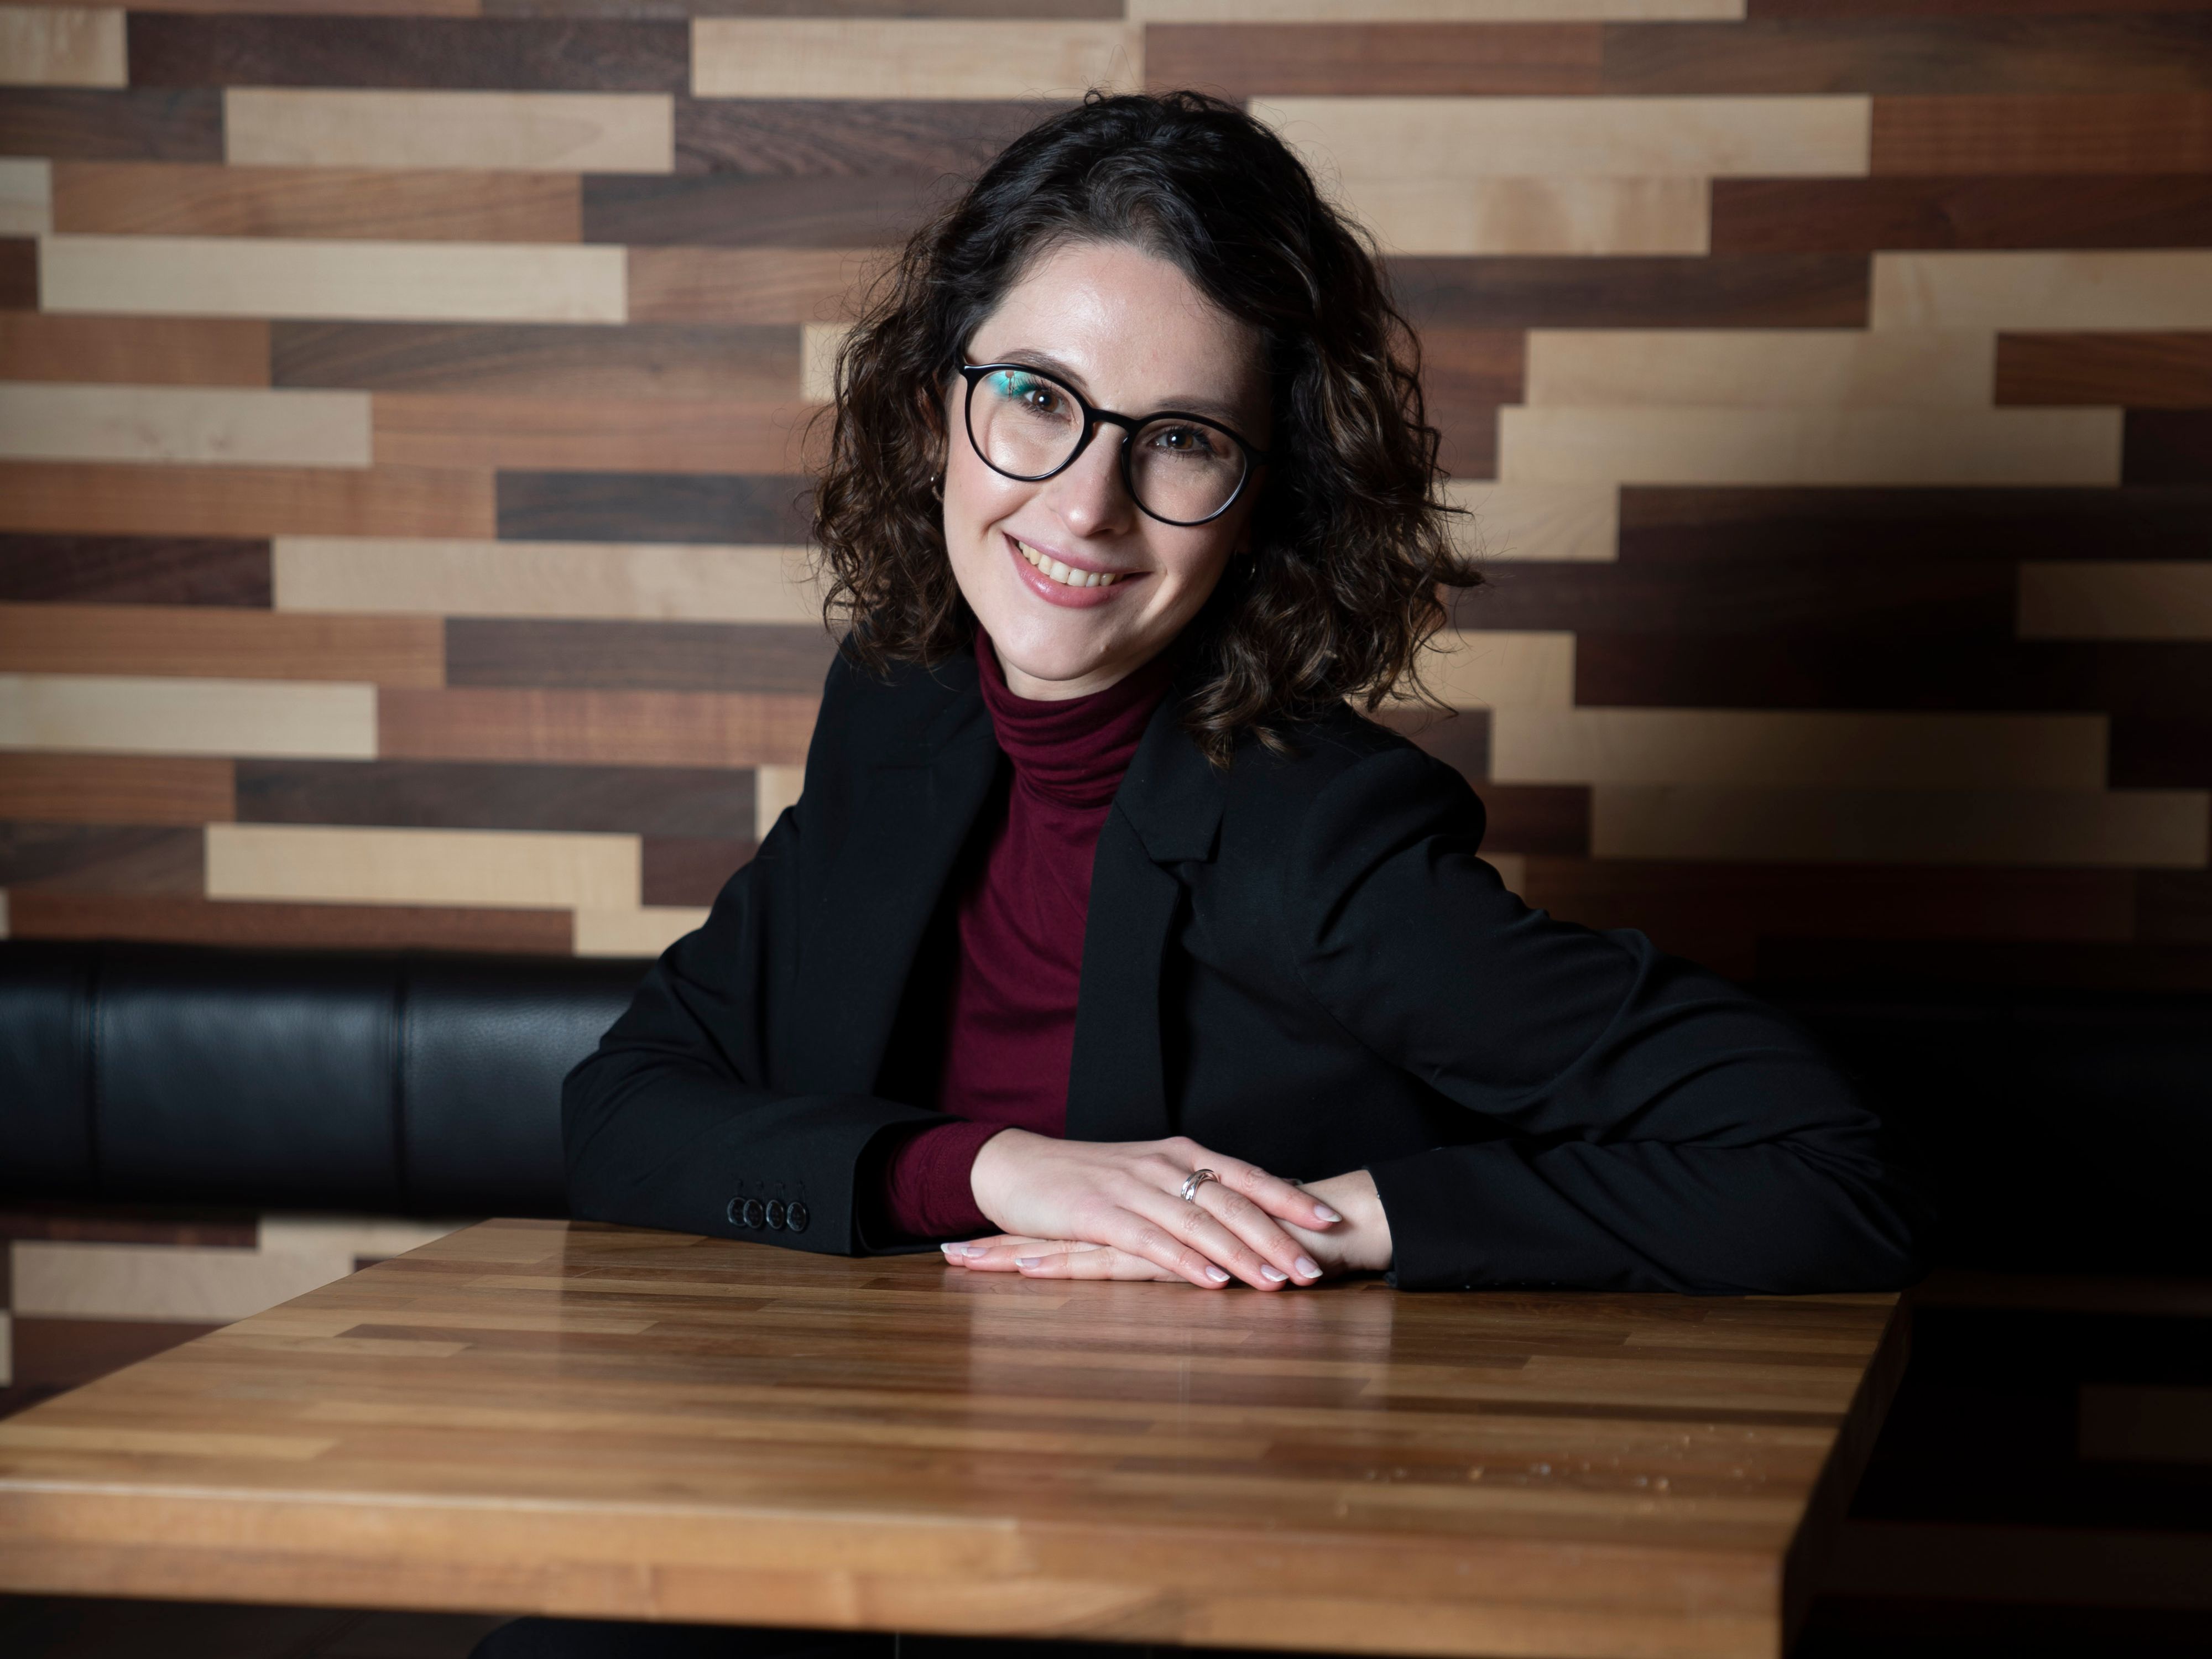 Julia Storch is a researcher at the Department of Marketing at the University of Groningen. Her current work focuses on factors that dynamically affect the healthiness of consecutive food choices during major grocery shopping trips.